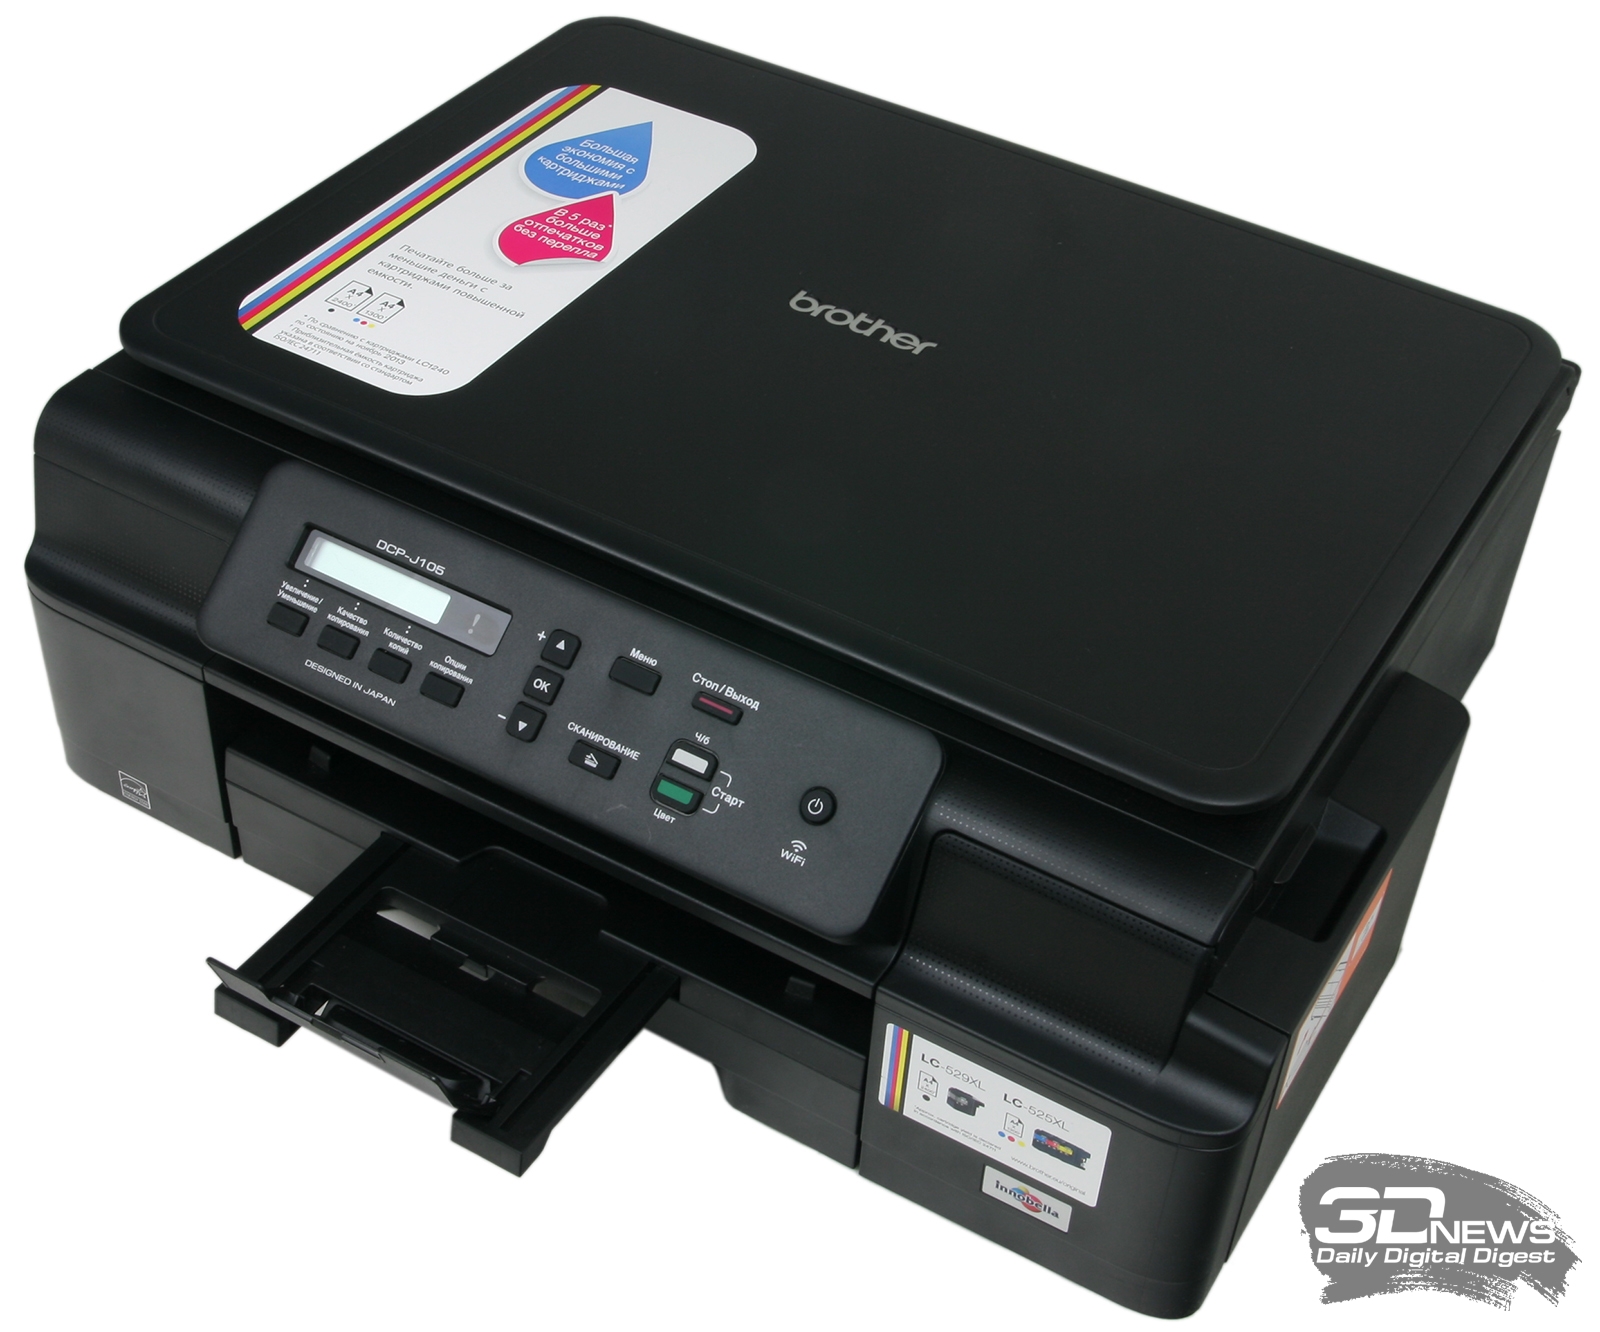 Brother dcp 10. Принтер brother DCP. Принтер brother DCP j105. МФУ brother DCP-l2500dr. МФУ brother DCP-l275dwr.